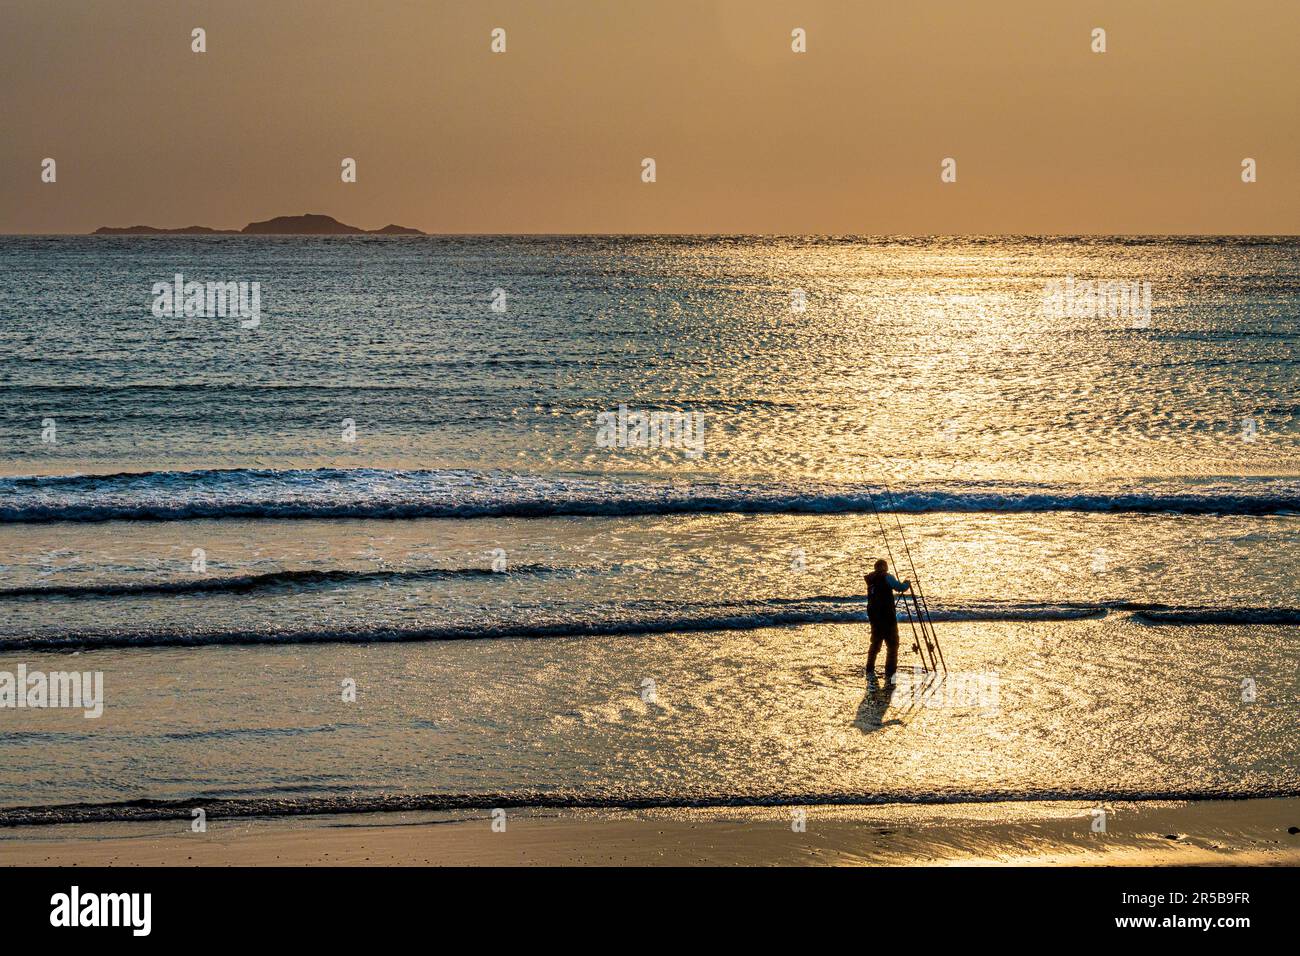 A sea angler beach casting in the sunset at Whitesands Bay, a Blue Flag beach on the St David's peninsula in the Pembrokeshire Coast National Park, Wa Stock Photo